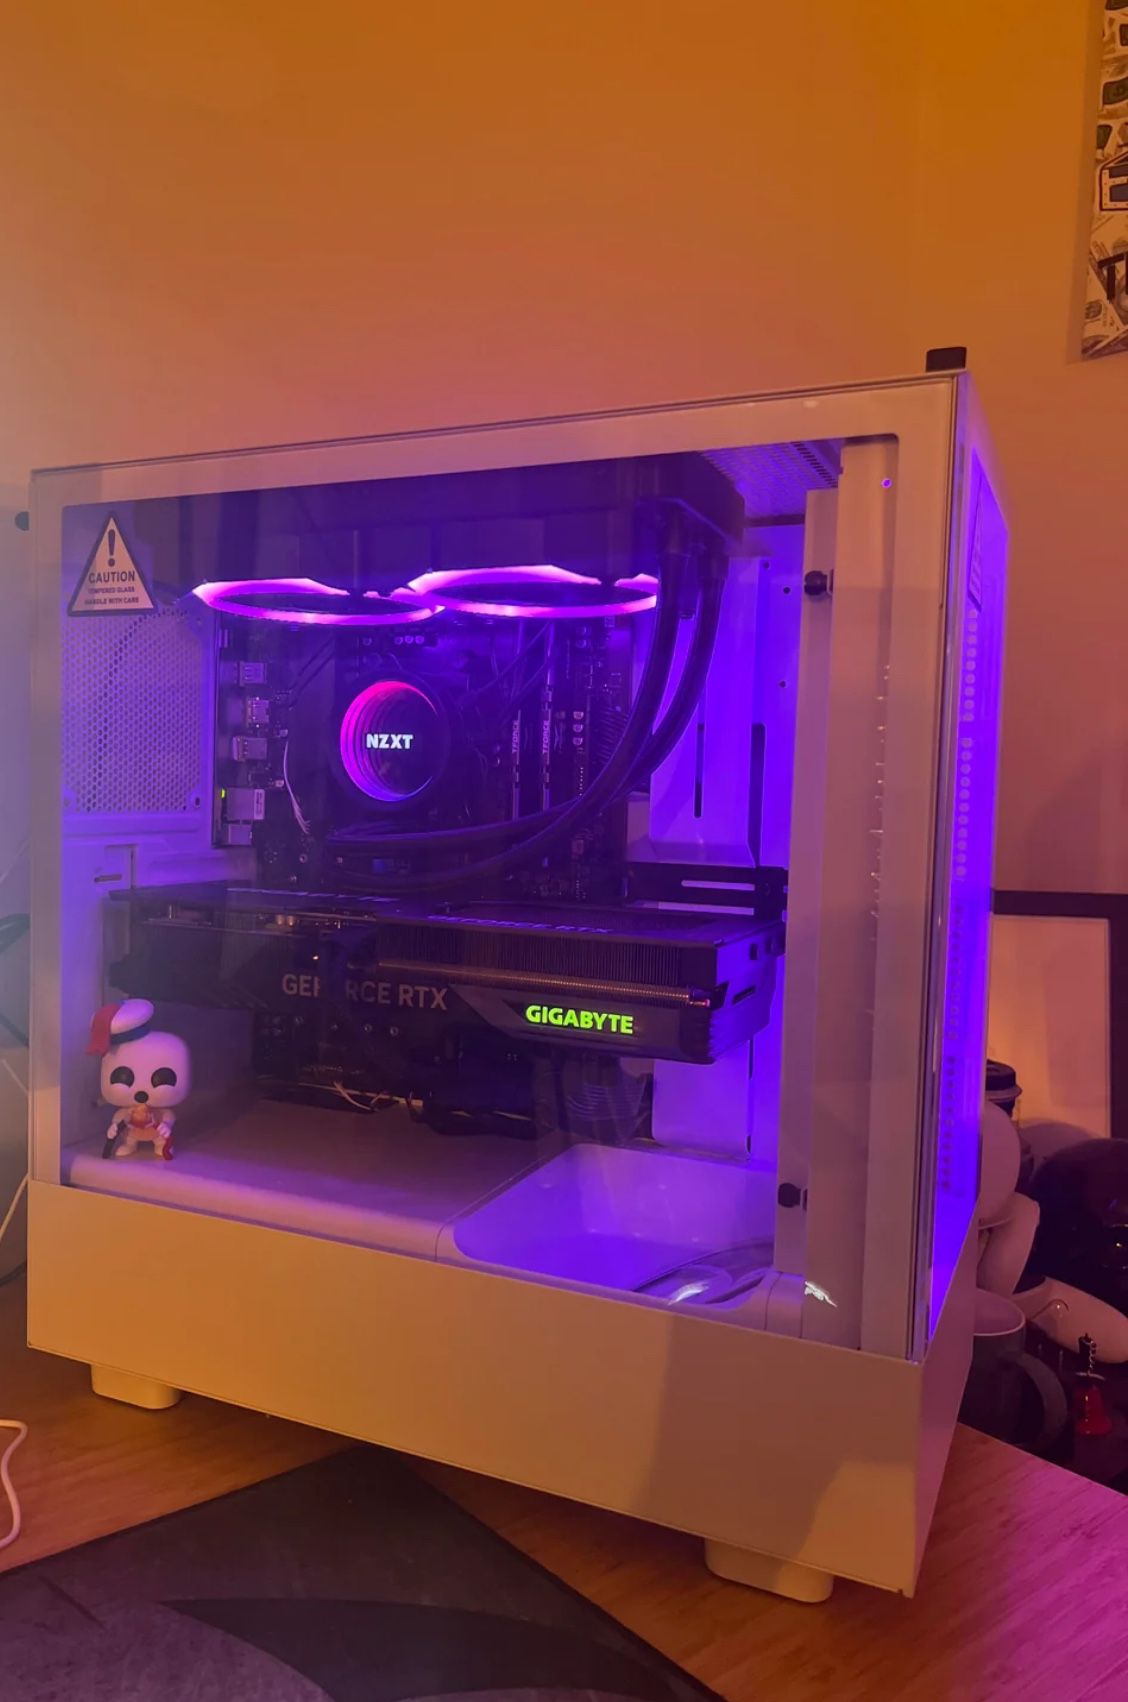 NZXT Player Two High End Gaming Pc